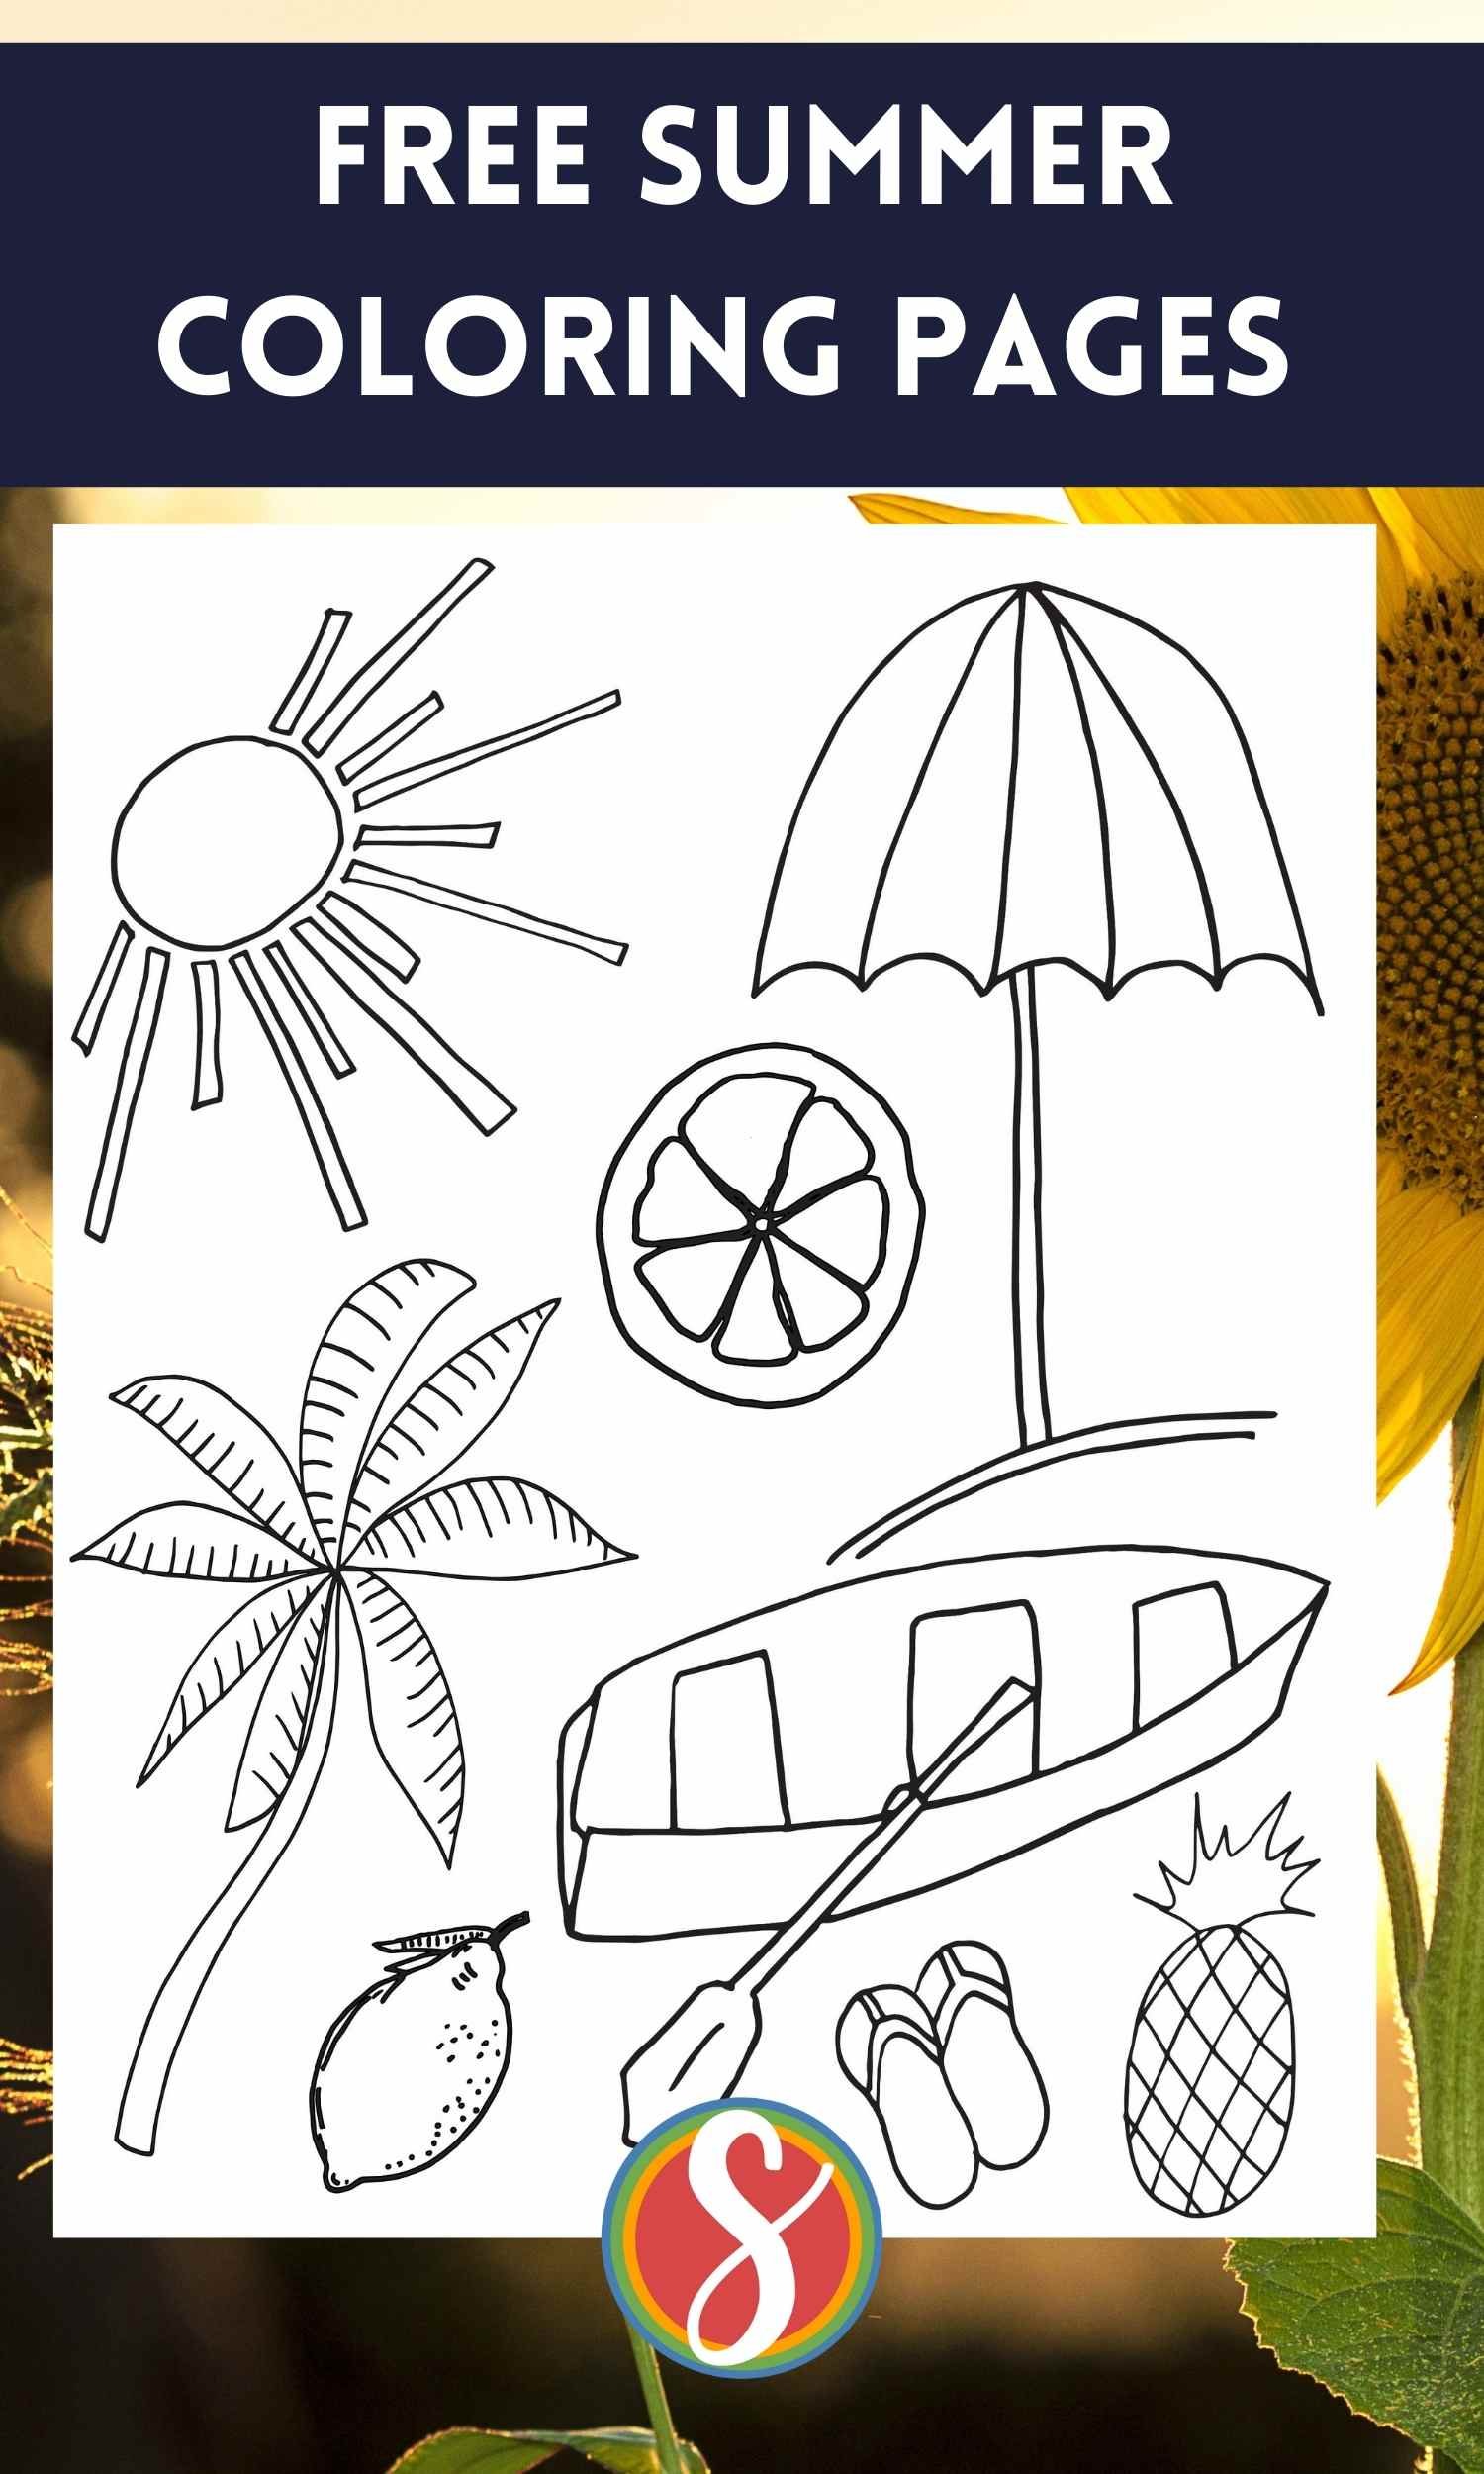 Free summer coloring pages â stevie doodles